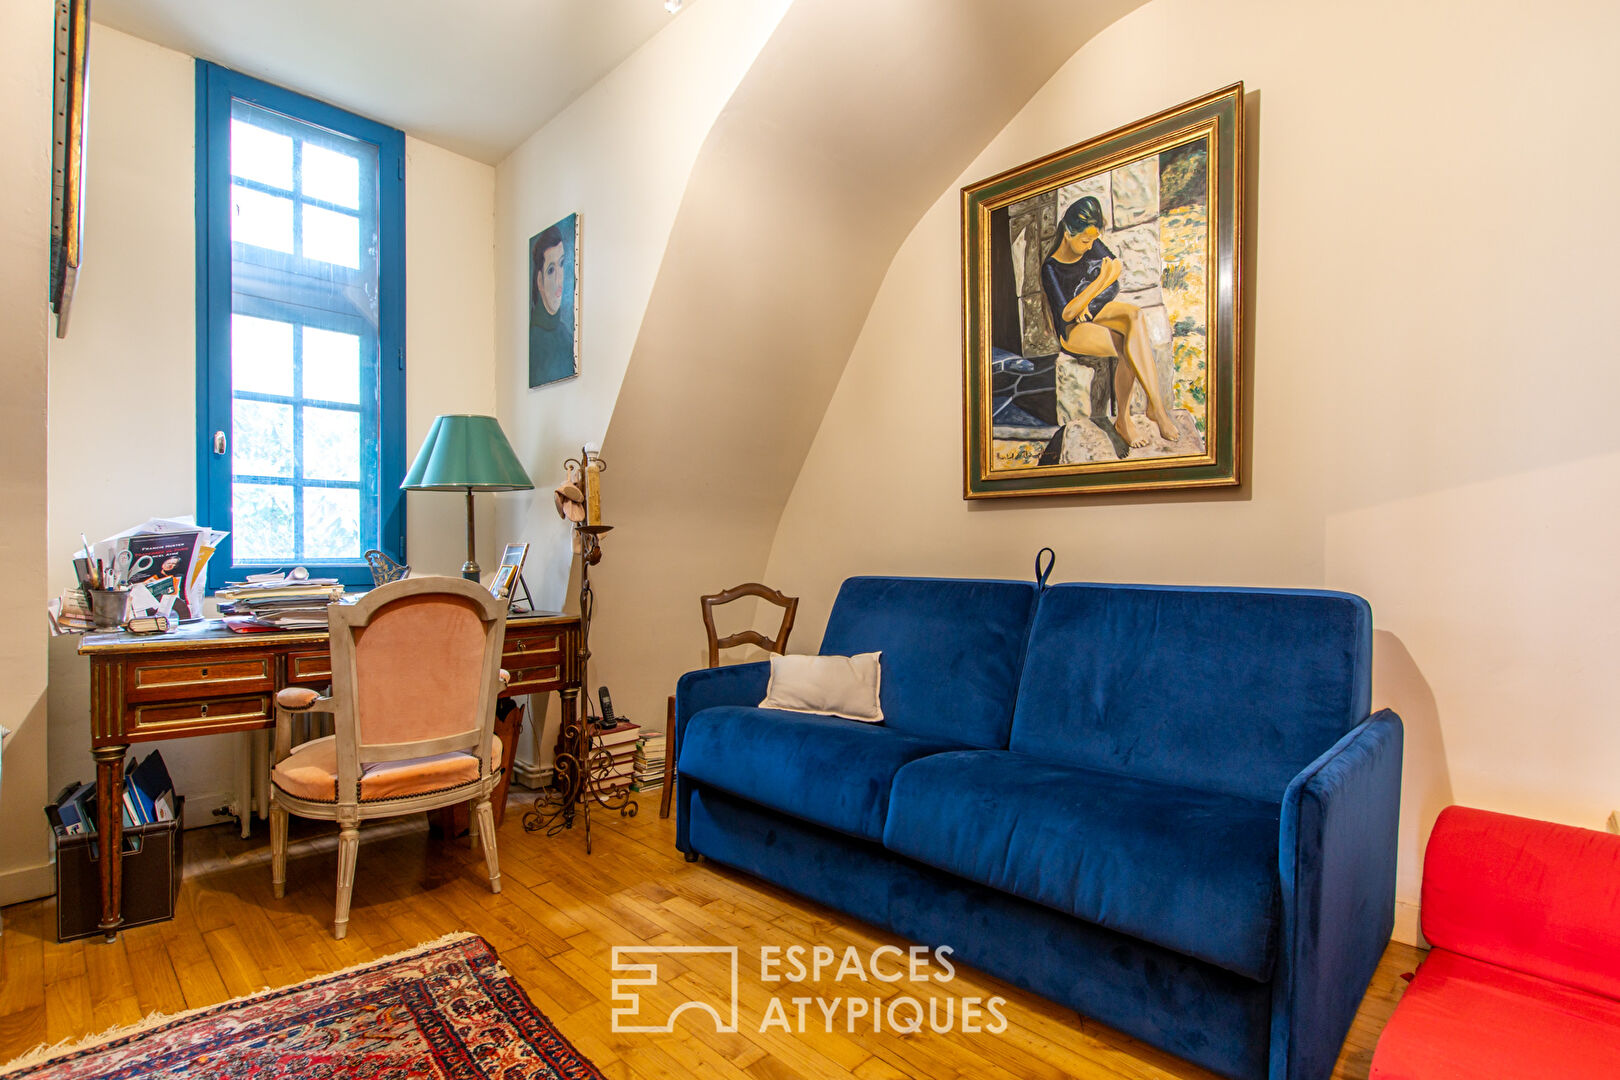 Charming duplex in the heart of a historic district of Angers